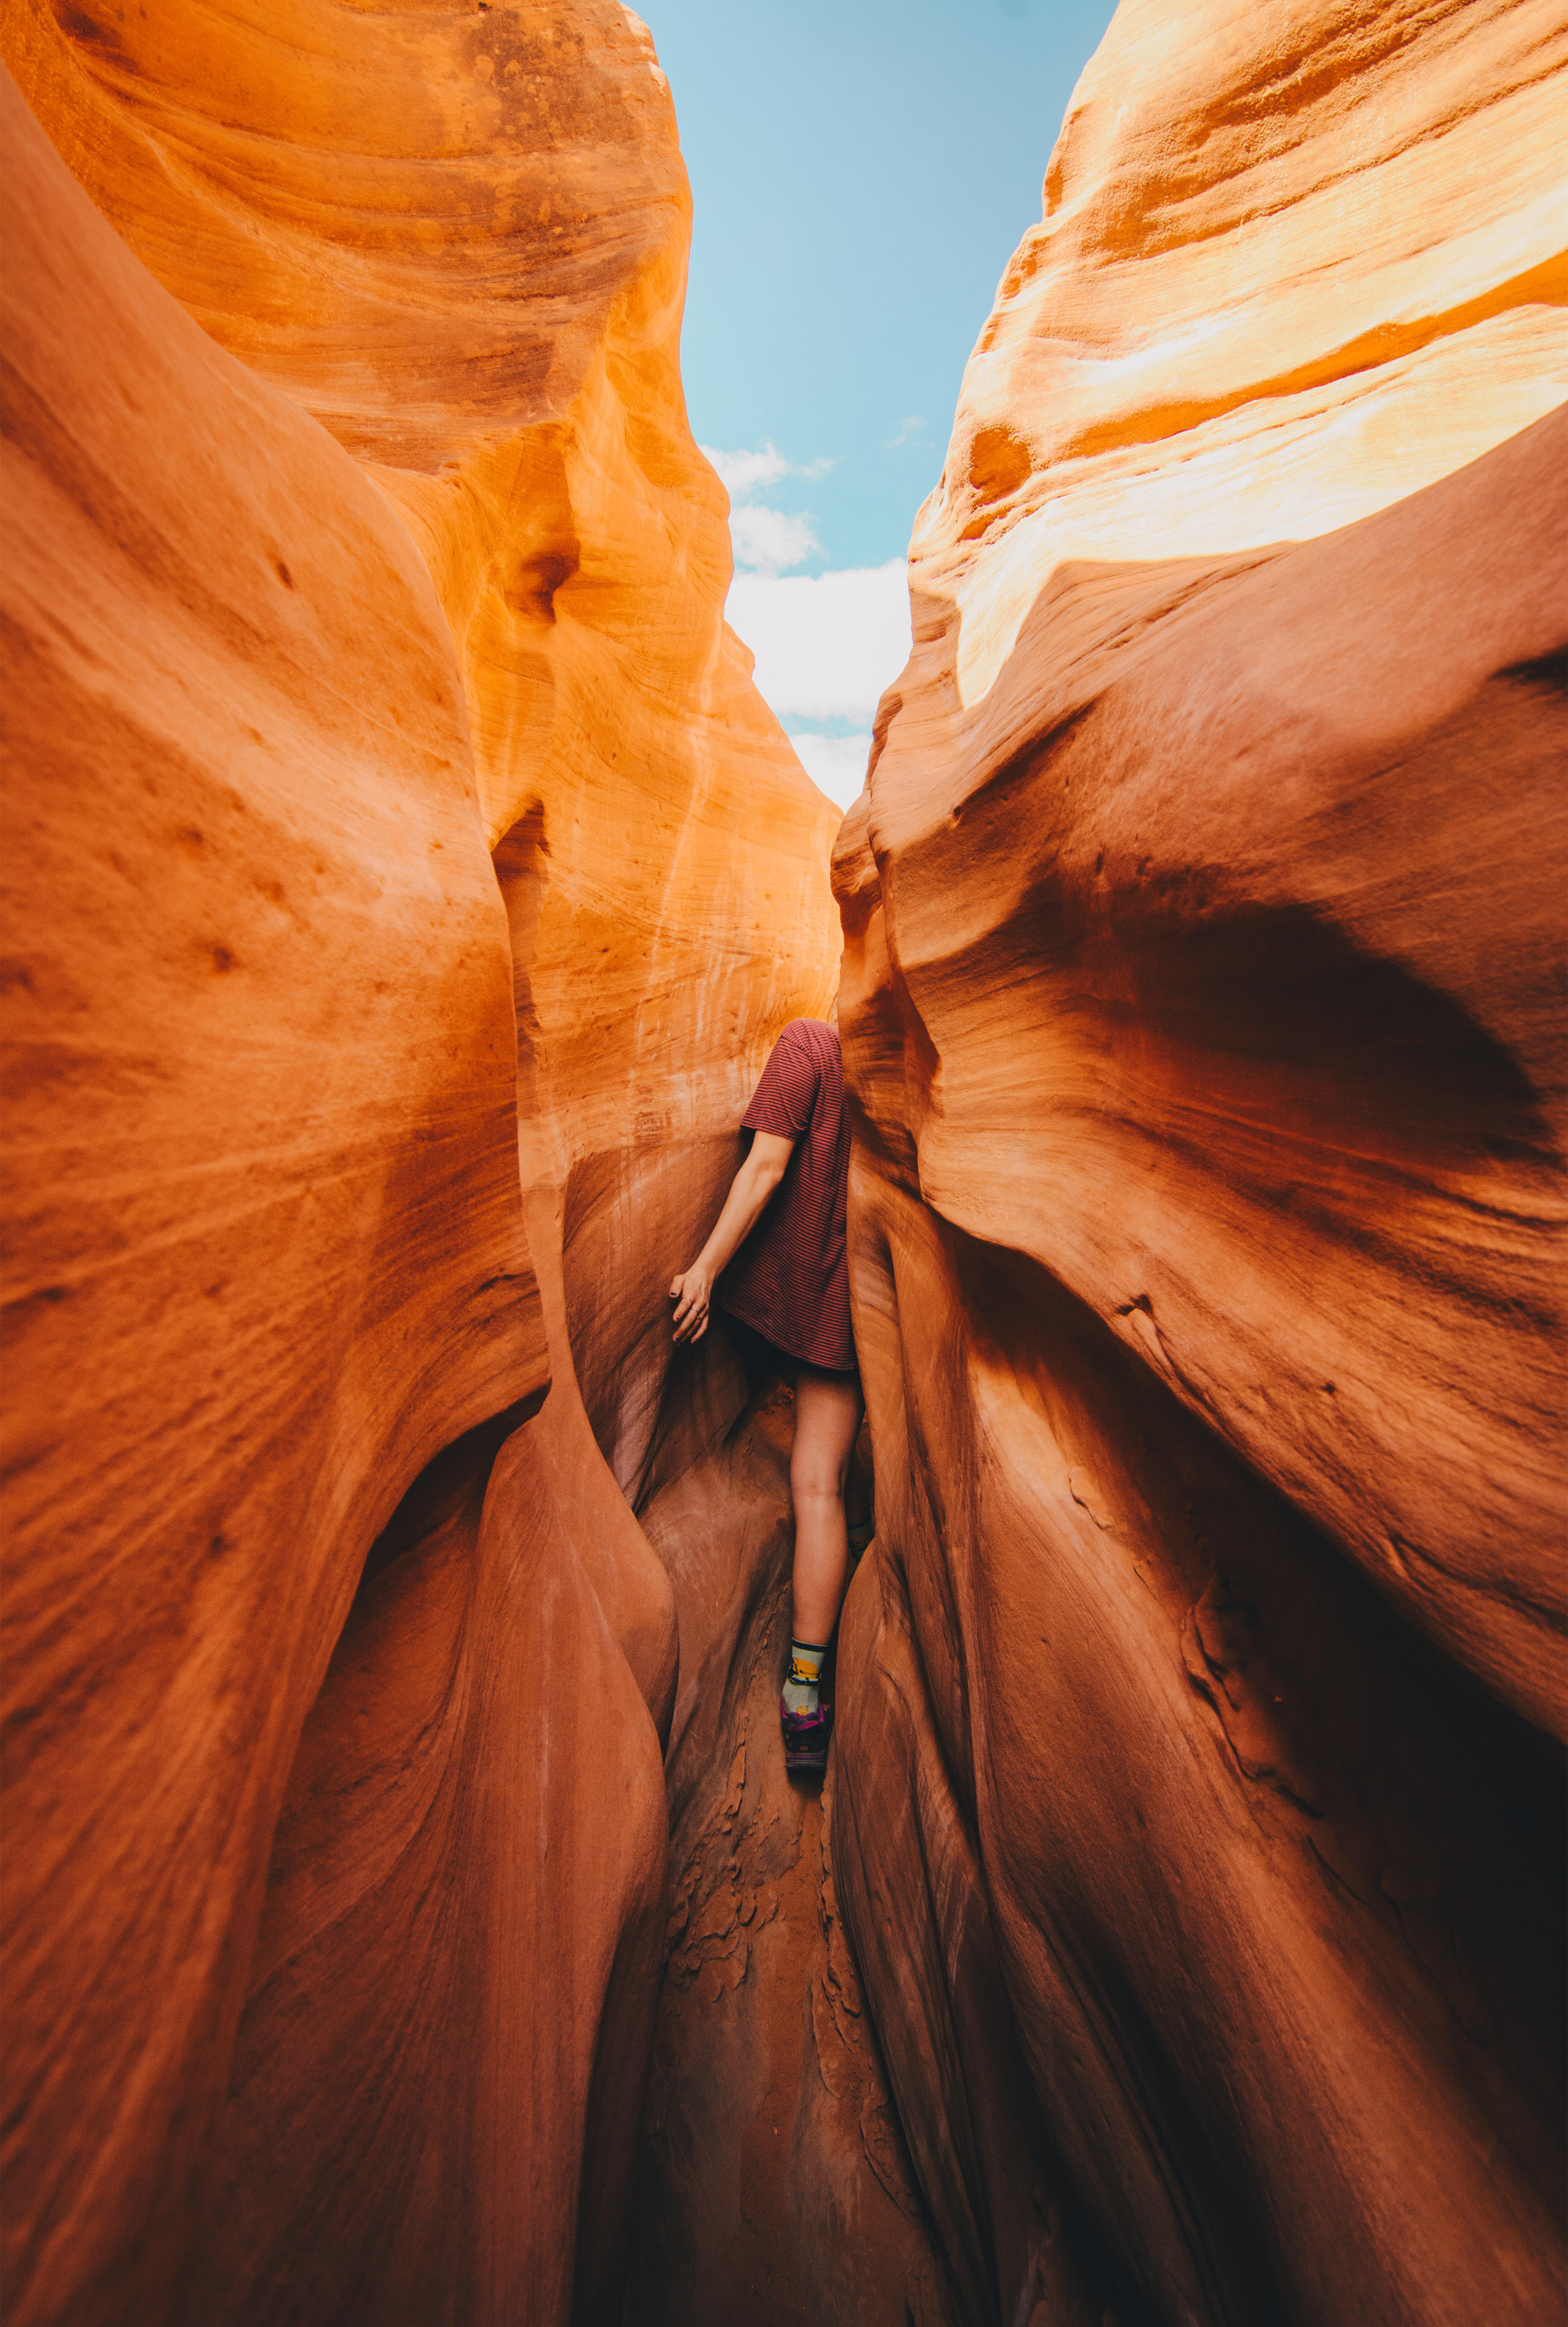 Woman squeezes through a narrow slot canyon in Escalante National Monument in Utah.